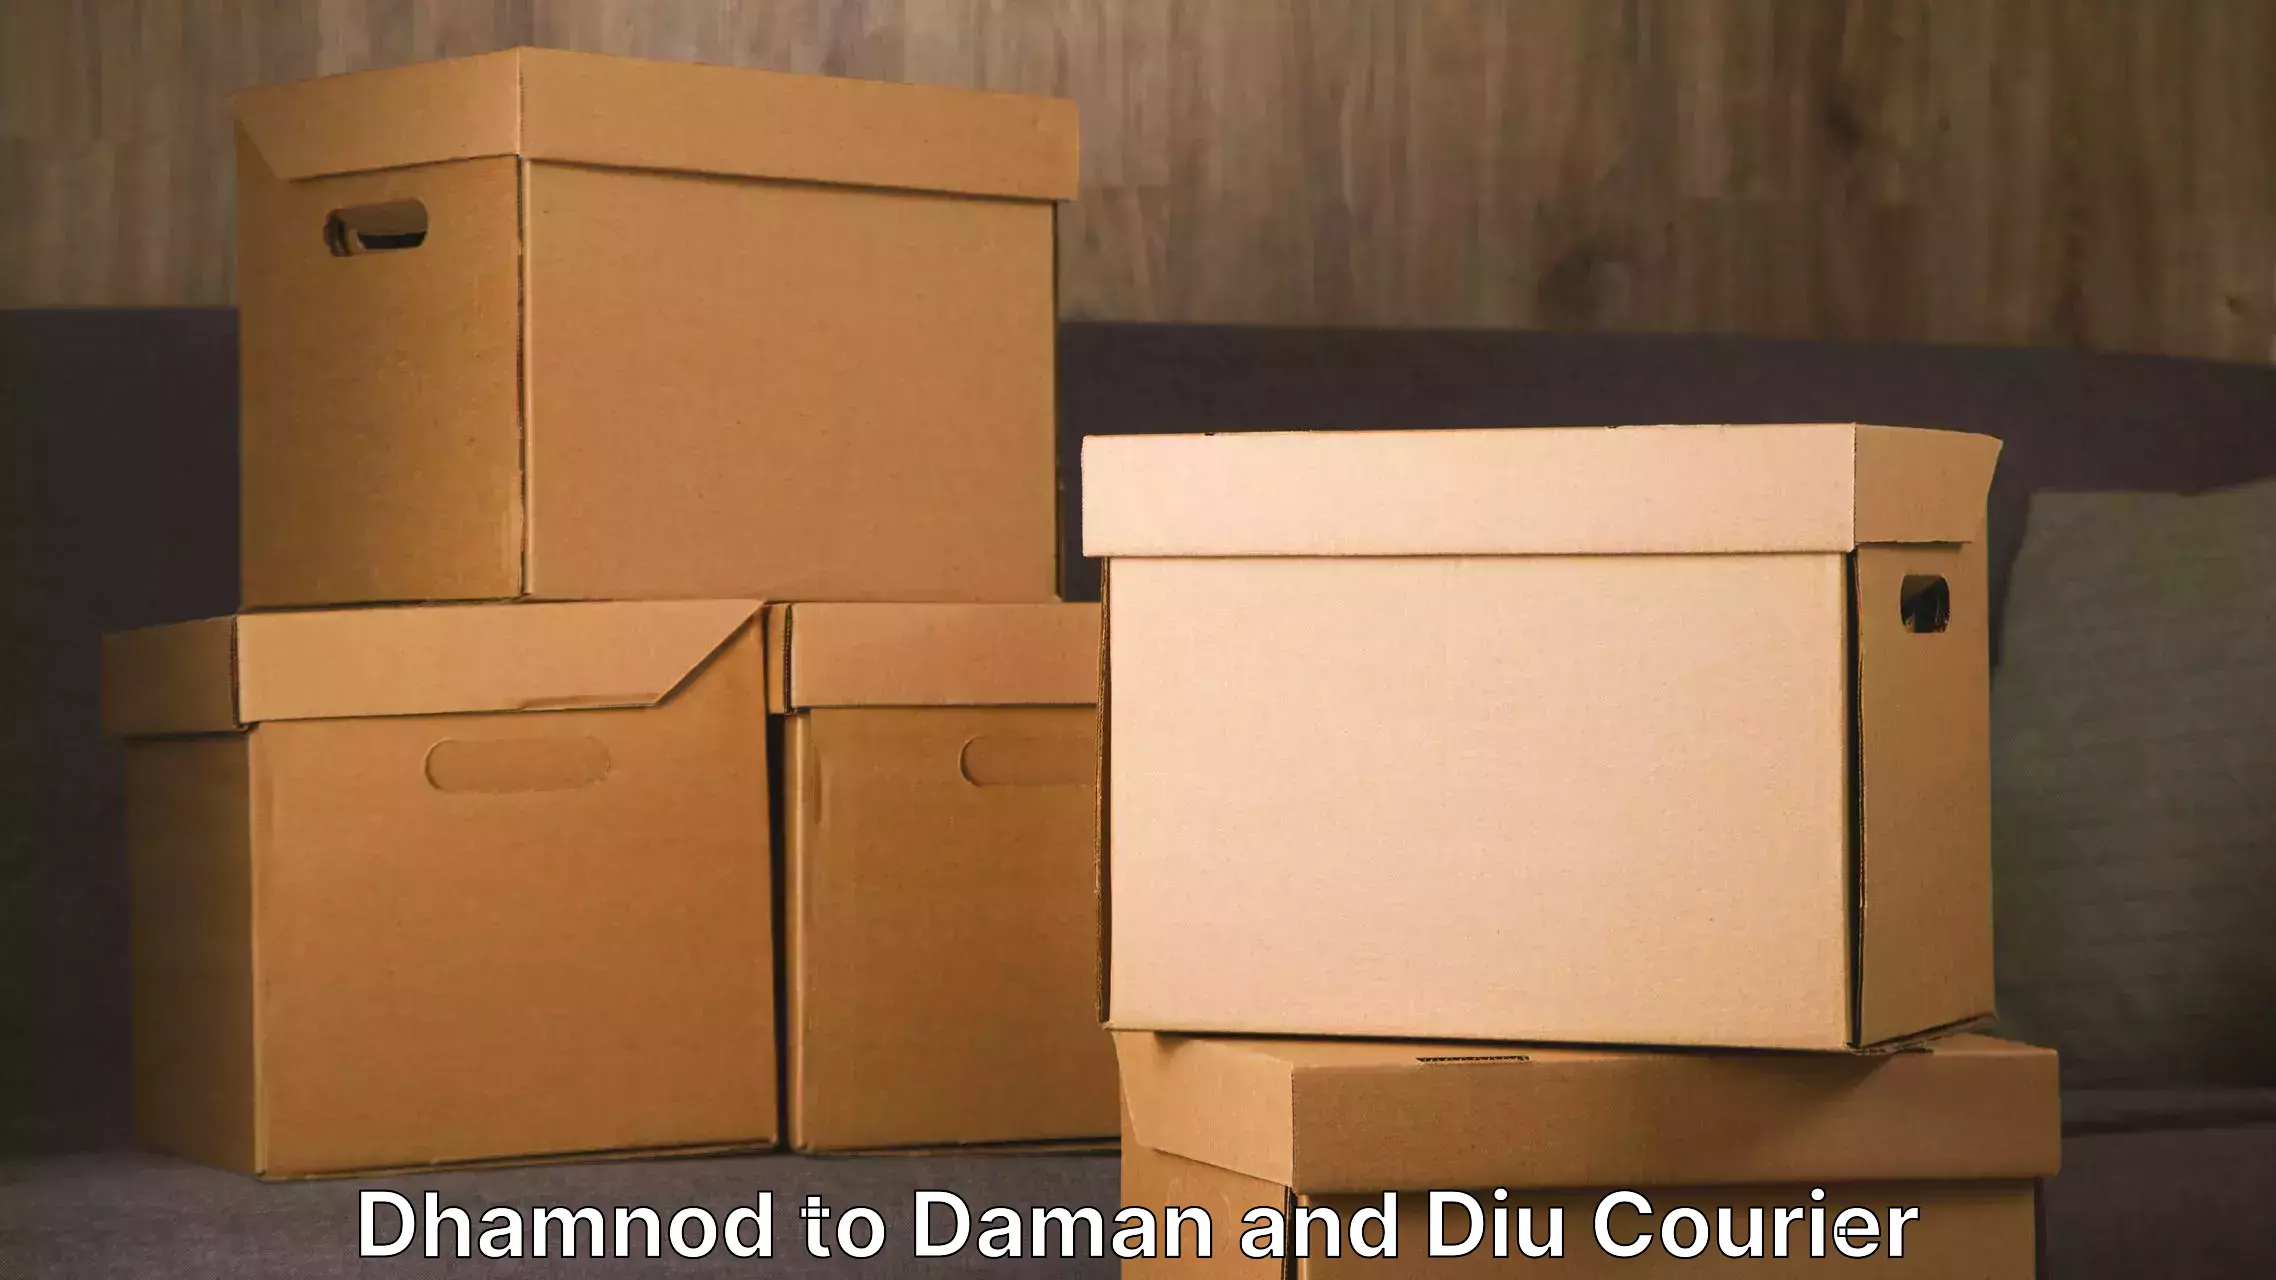 Quality relocation assistance in Dhamnod to Diu